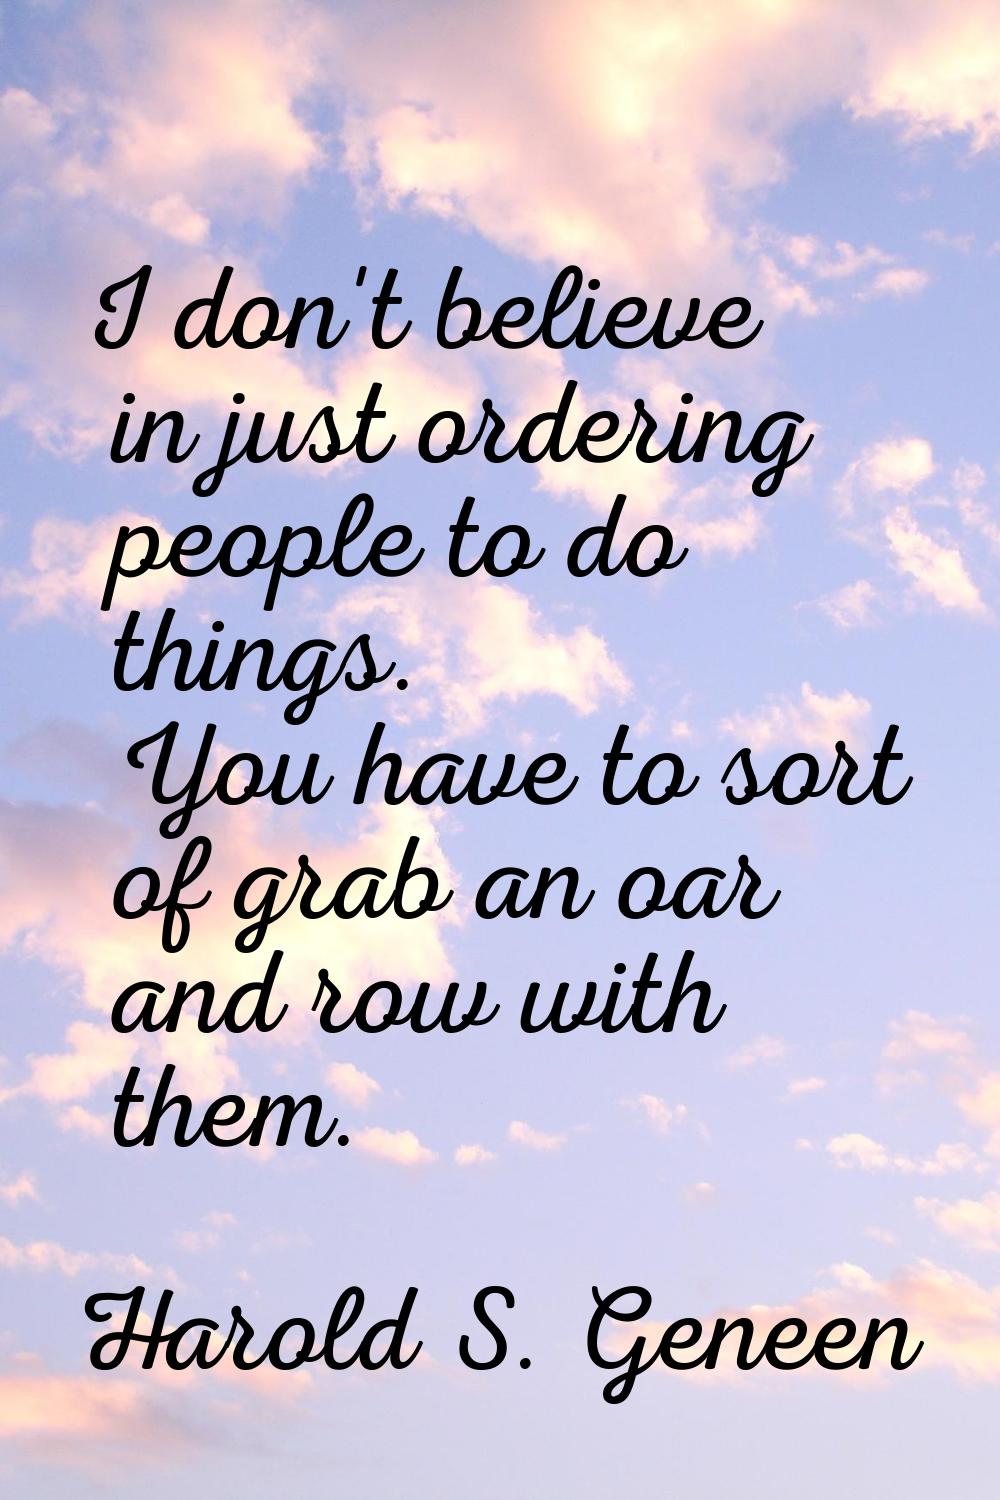 I don't believe in just ordering people to do things. You have to sort of grab an oar and row with 